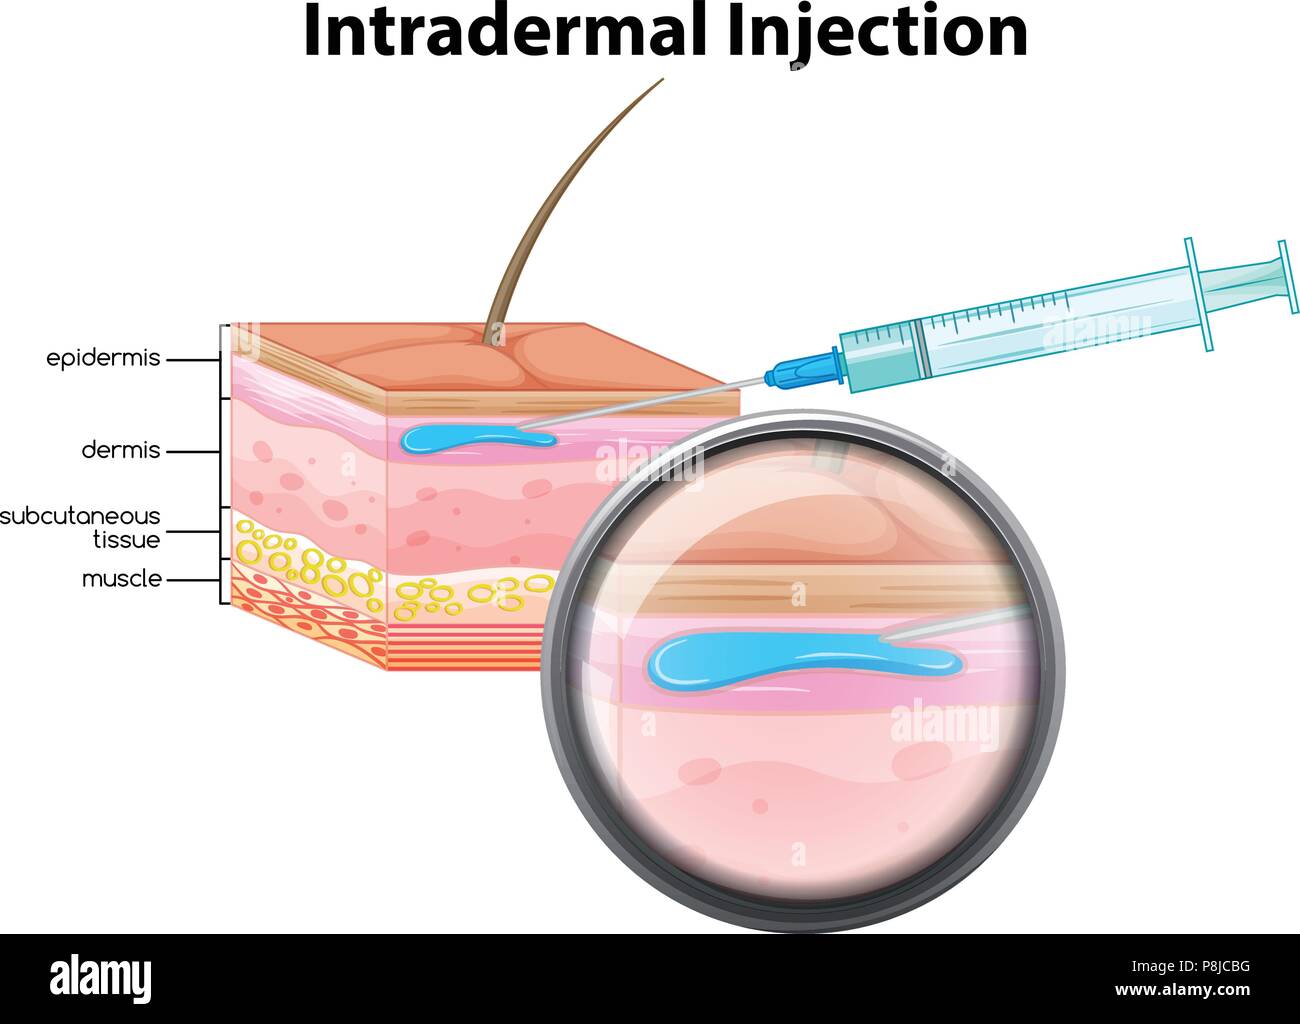 intradermal injection